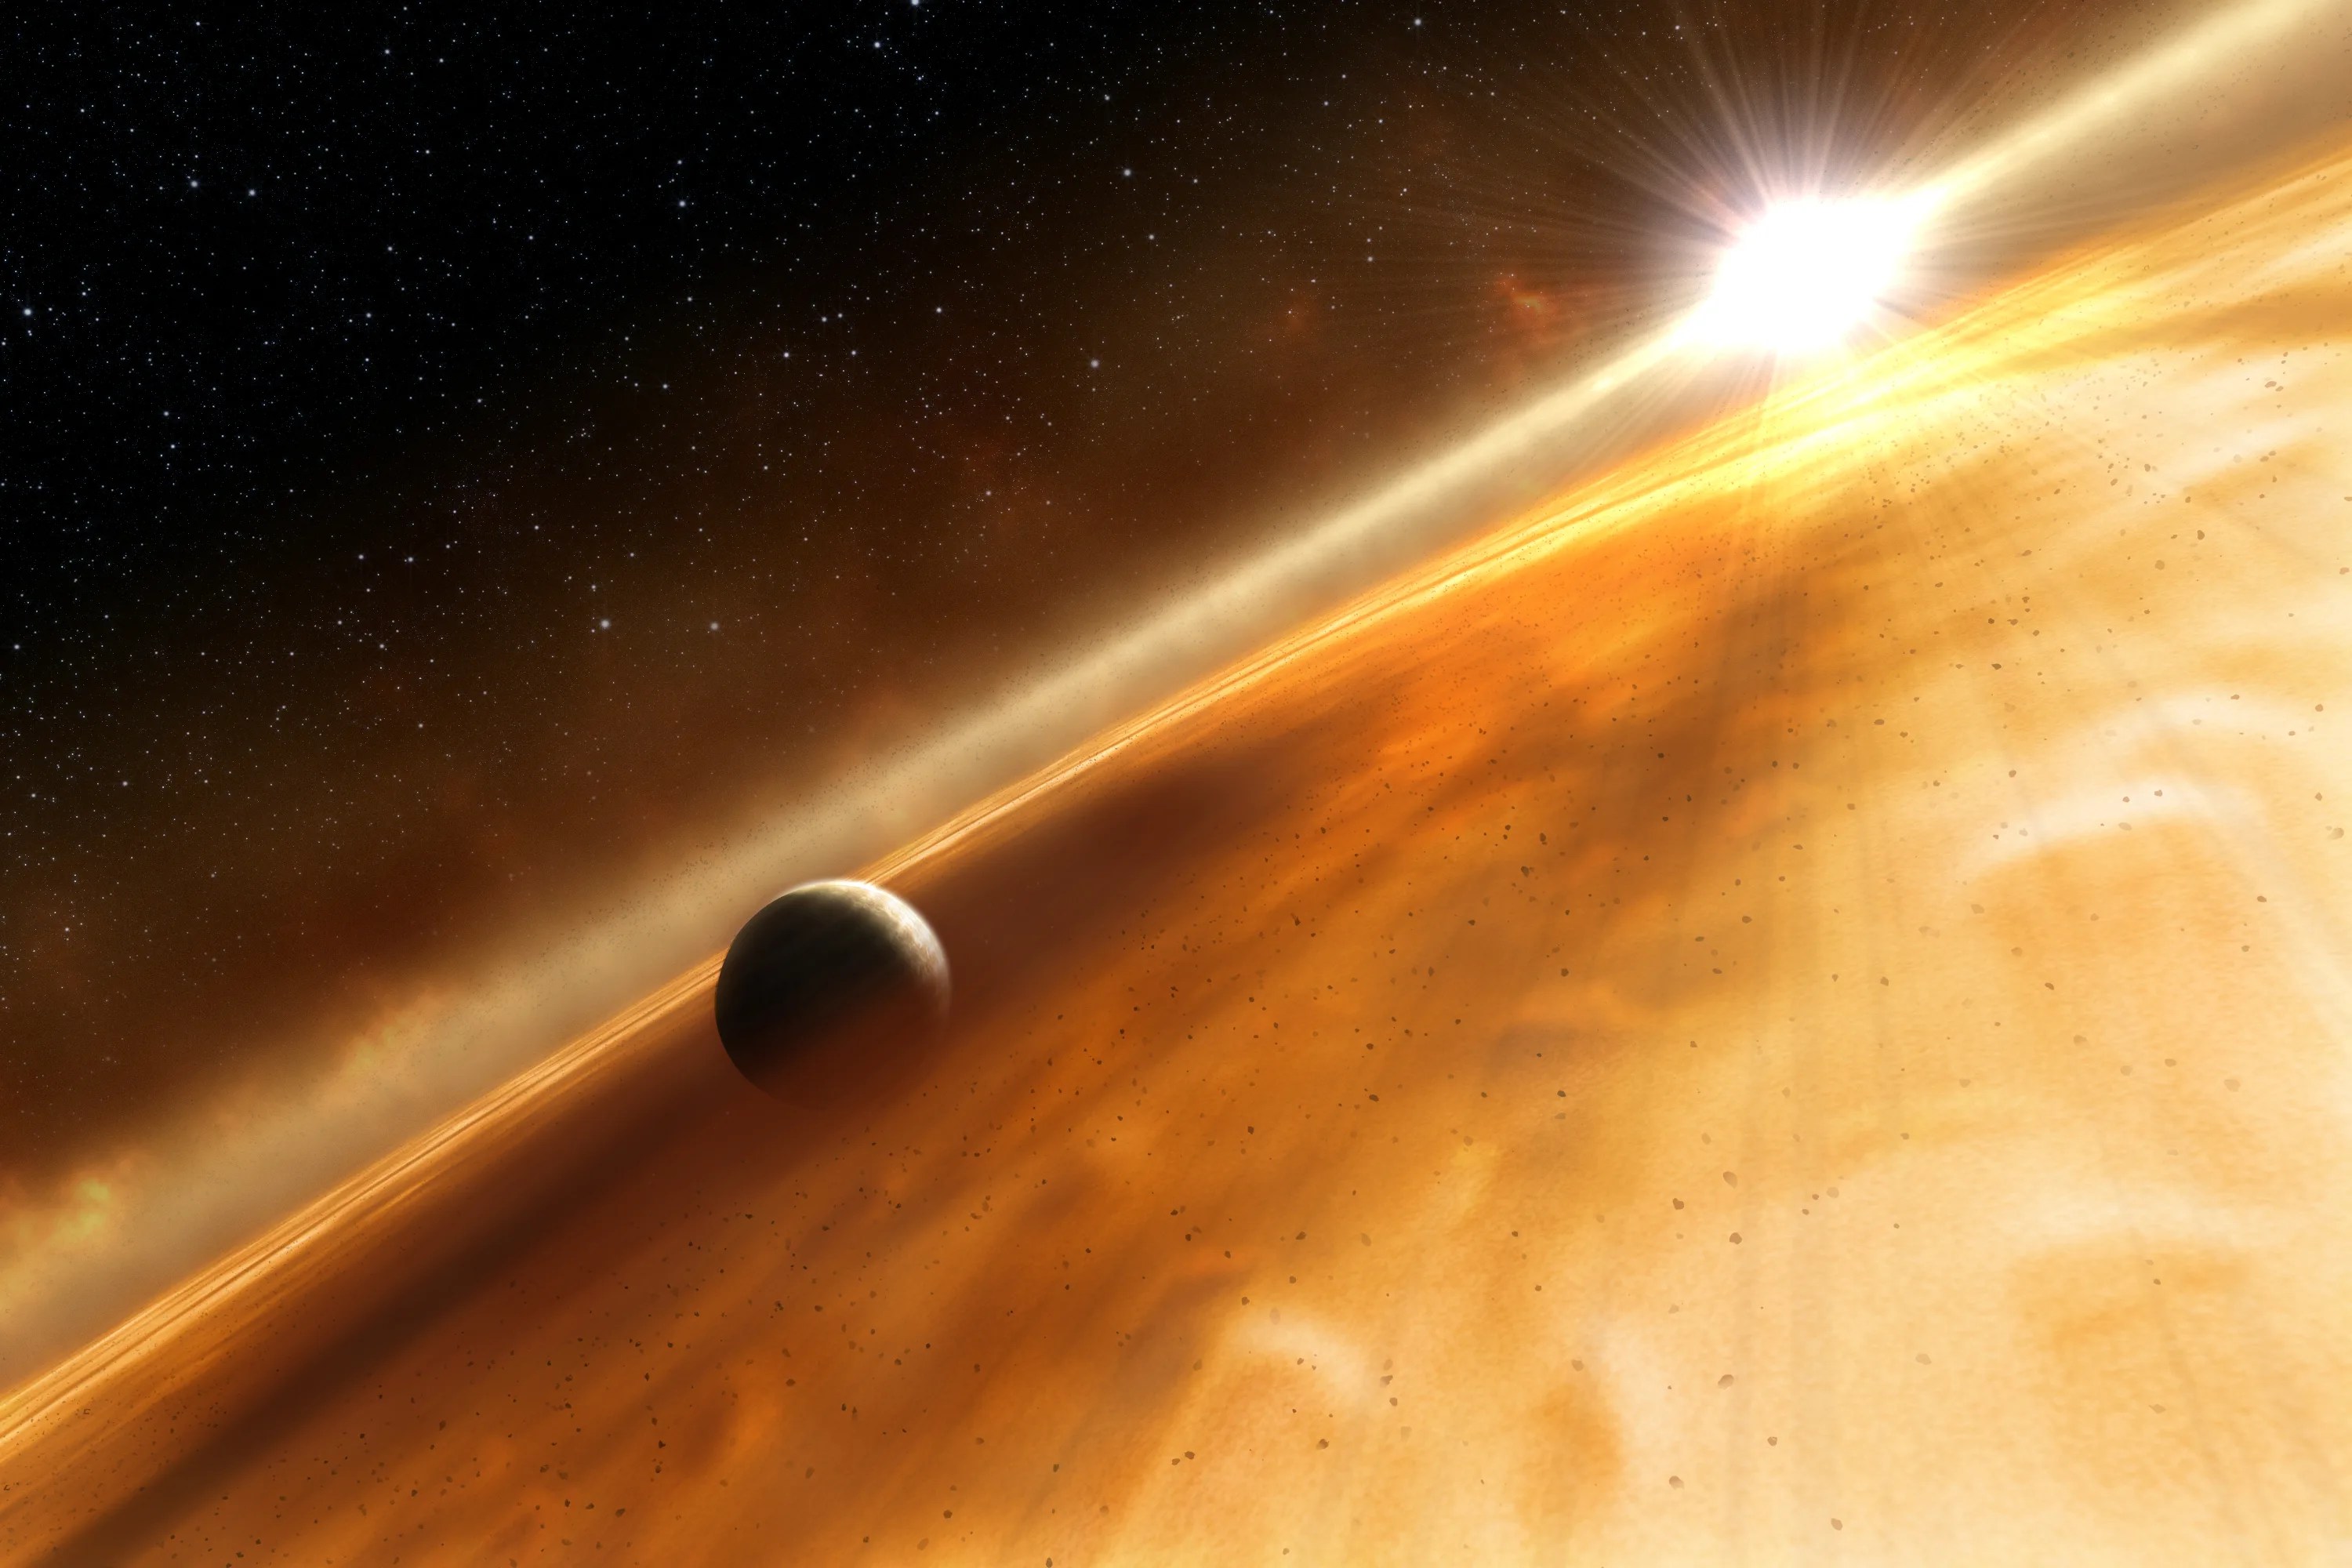 Artist's concept of the star fomalhaut and the jupiter-type planet that the hubble space telescope observed.